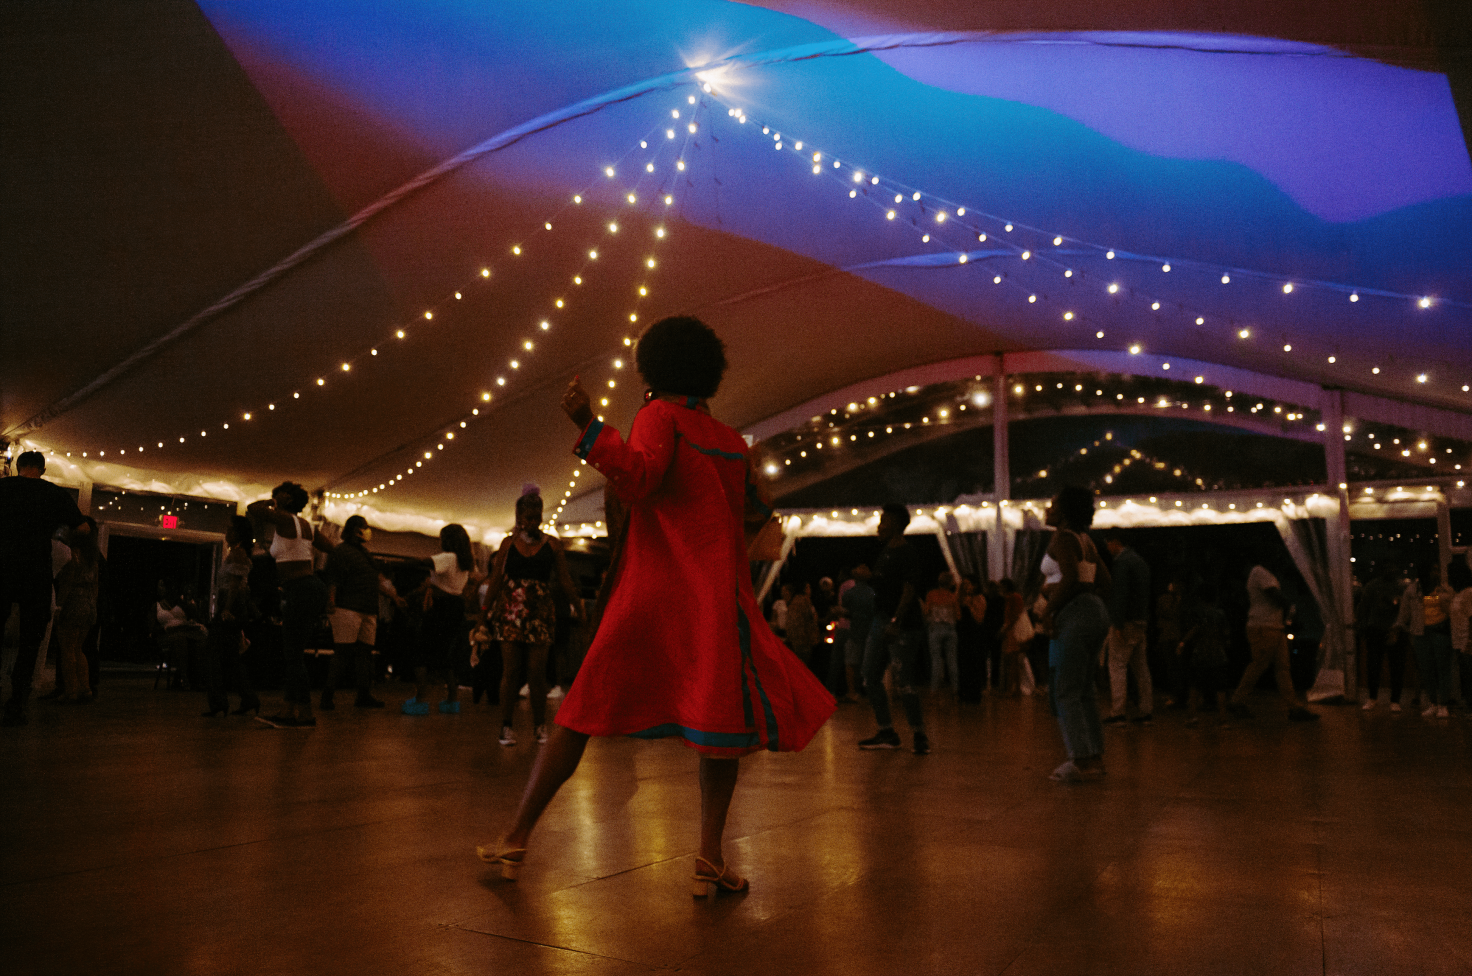 A photo of a person in a red dress with green strips in the middle of a dance floor. There are other people around them. Everyone is dancing.